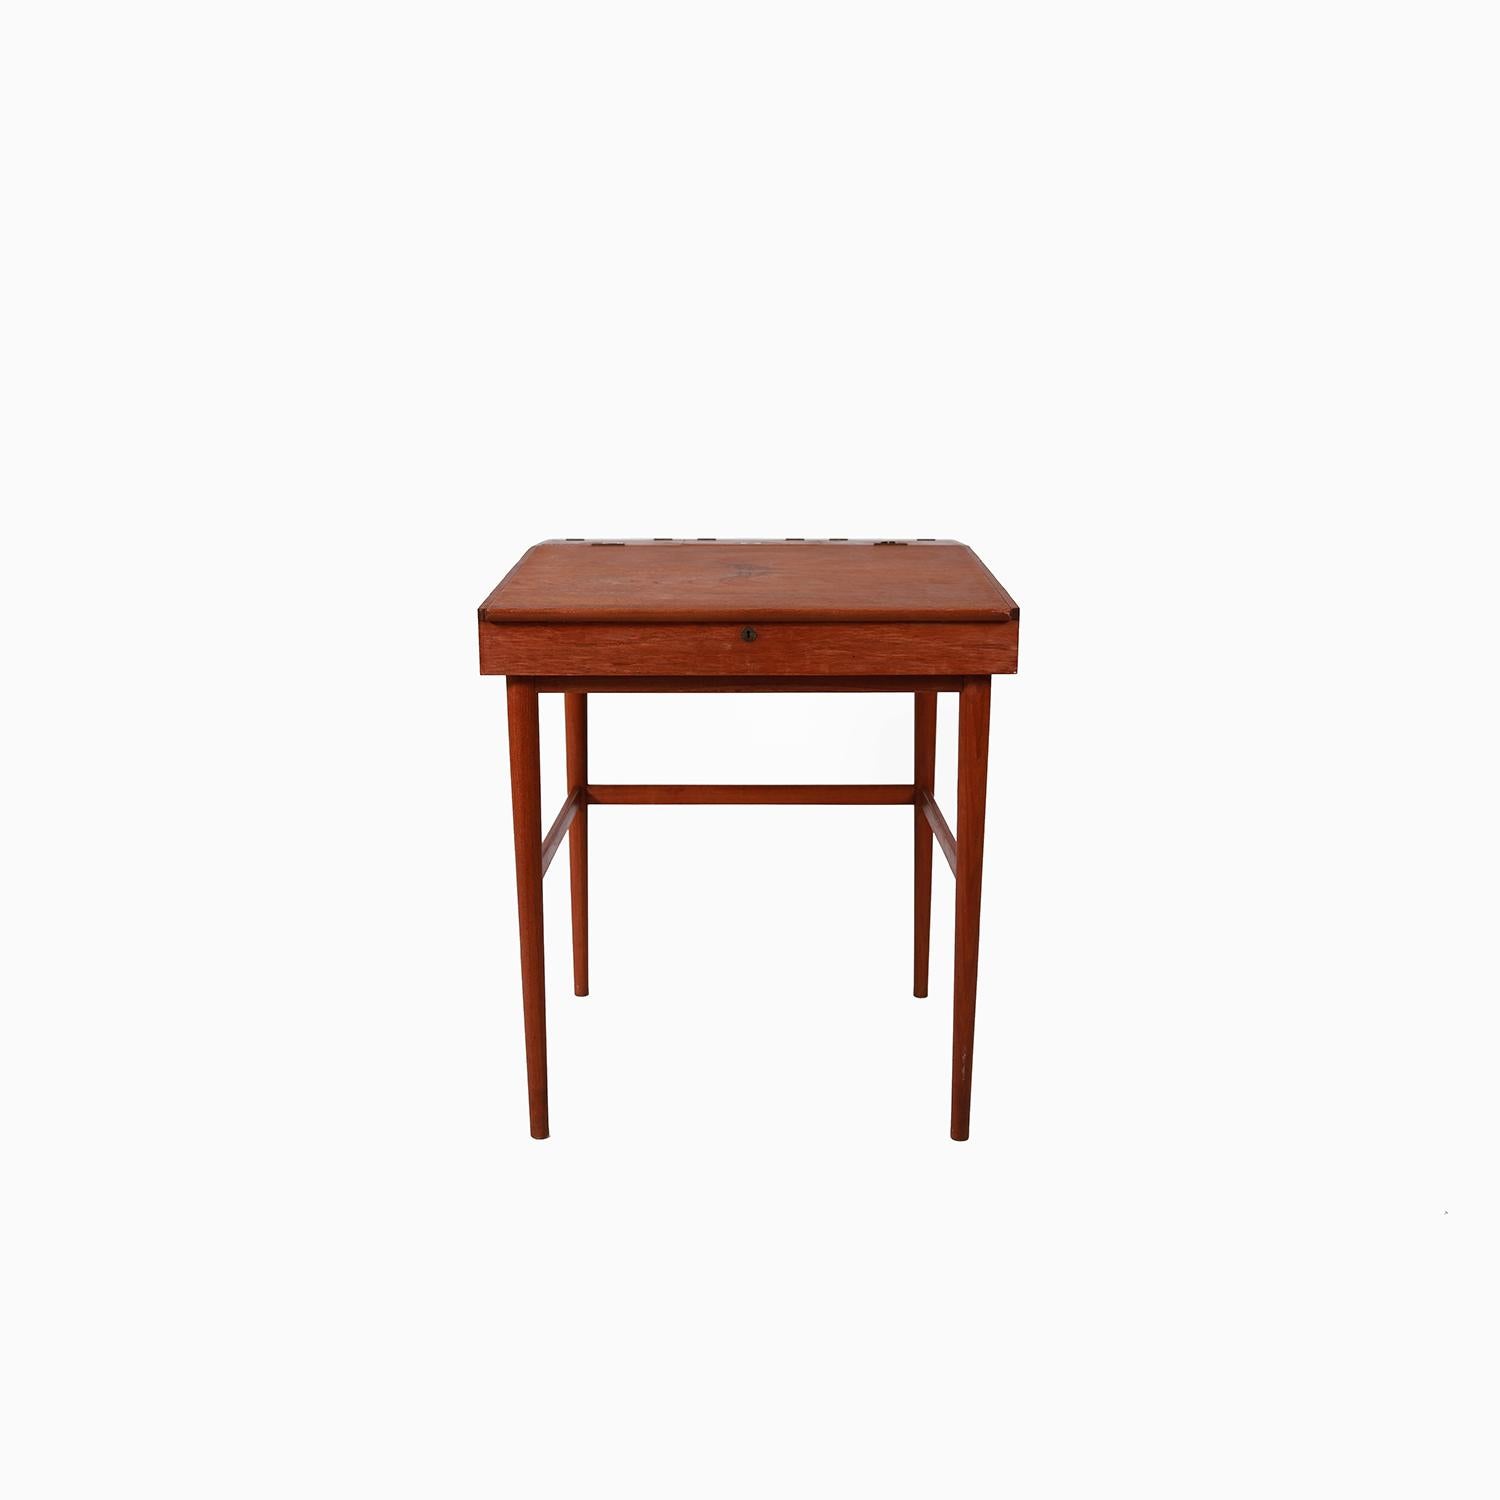 A rare Finn Juhl design know as the FJ 40. One of Finn Juhl’s earliest designs that is produced by master cabinet maker Niels Vodder.A small compact writing desk in teak with very figural grain. Large storage space with three smaller storage spaces